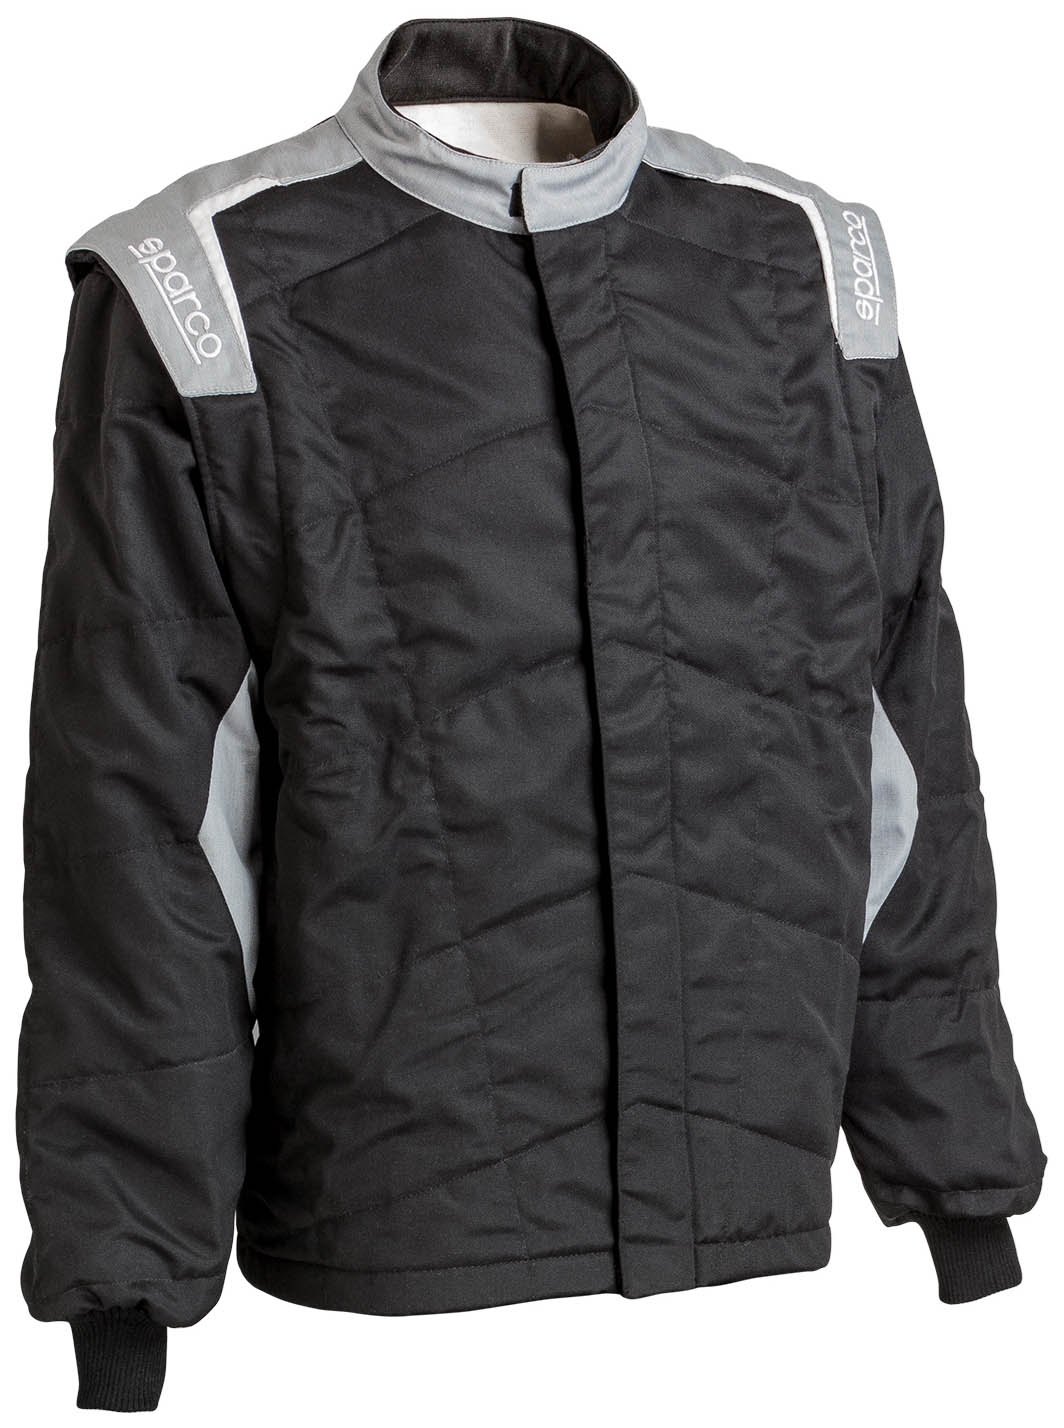 Sparco Sport Light Pro Racing Jackets